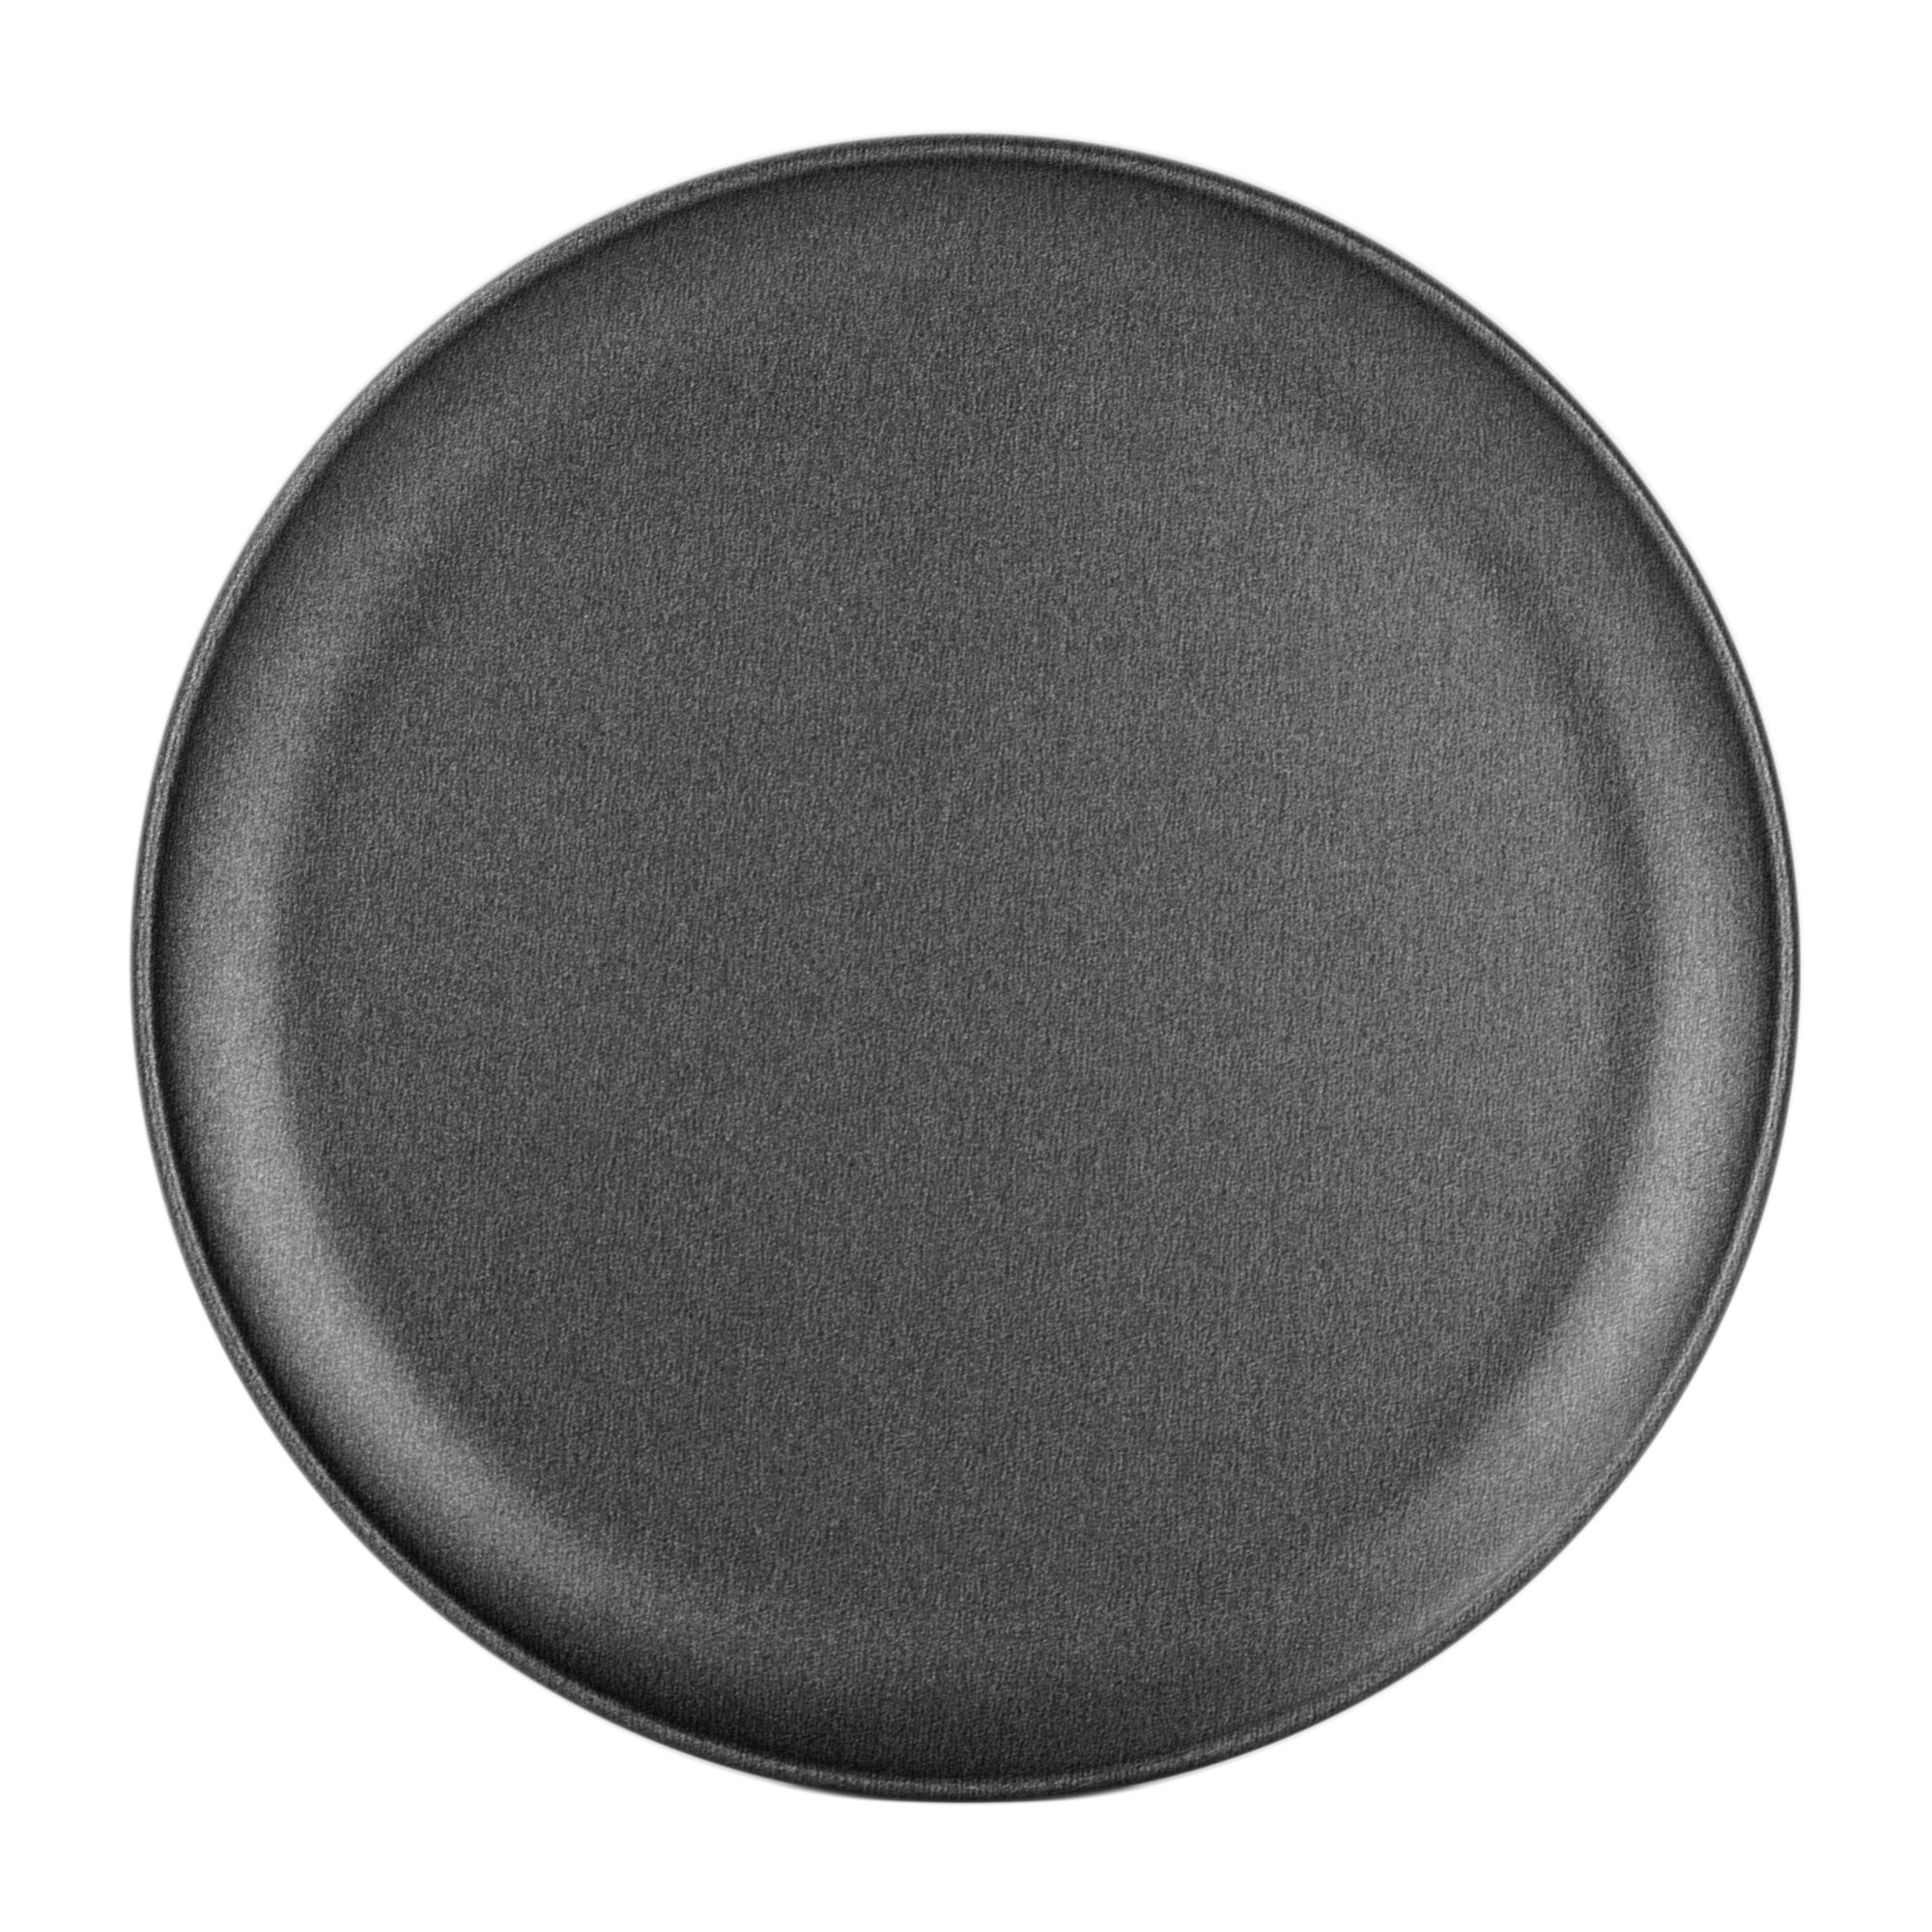 G&S Metal Products Company Nonstick ProBake Non-Stick Pizza Baking Pan, 16 inches, Charcoal